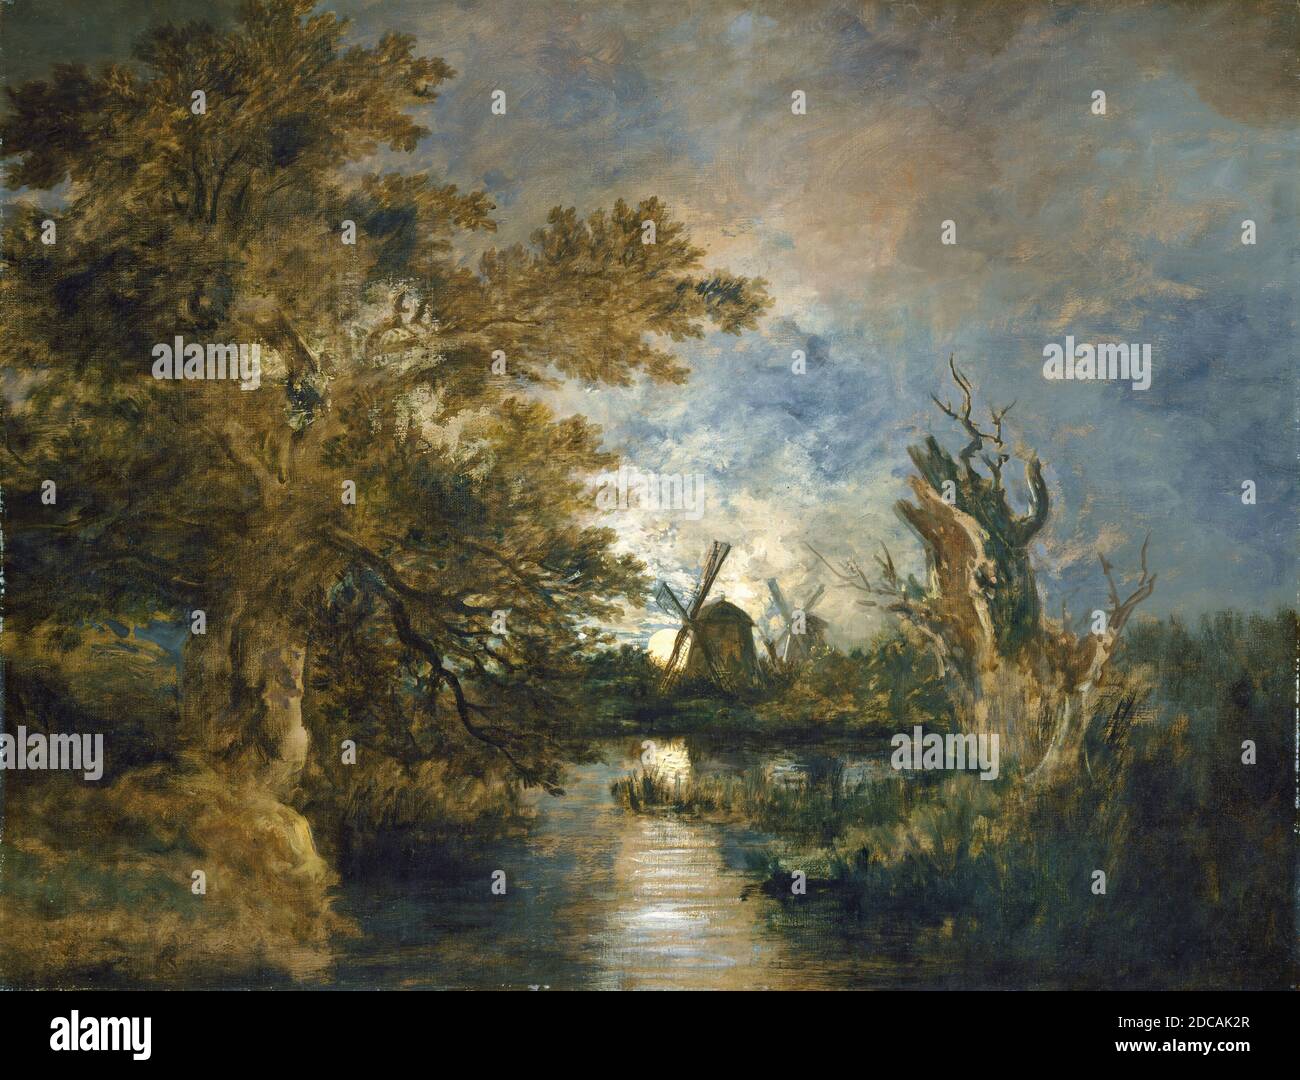 John Crome, (artist), British, 1768 - 1821, Moonlight on the Yare, c. 1816/1817, oil on canvas, overall: 98.4 x 125.7 cm (38 3/4 x 49 1/2 in.), framed: 122.4 x 149.9 x 9.2 cm (48 3/16 x 59 x 3 5/8 in Stock Photo